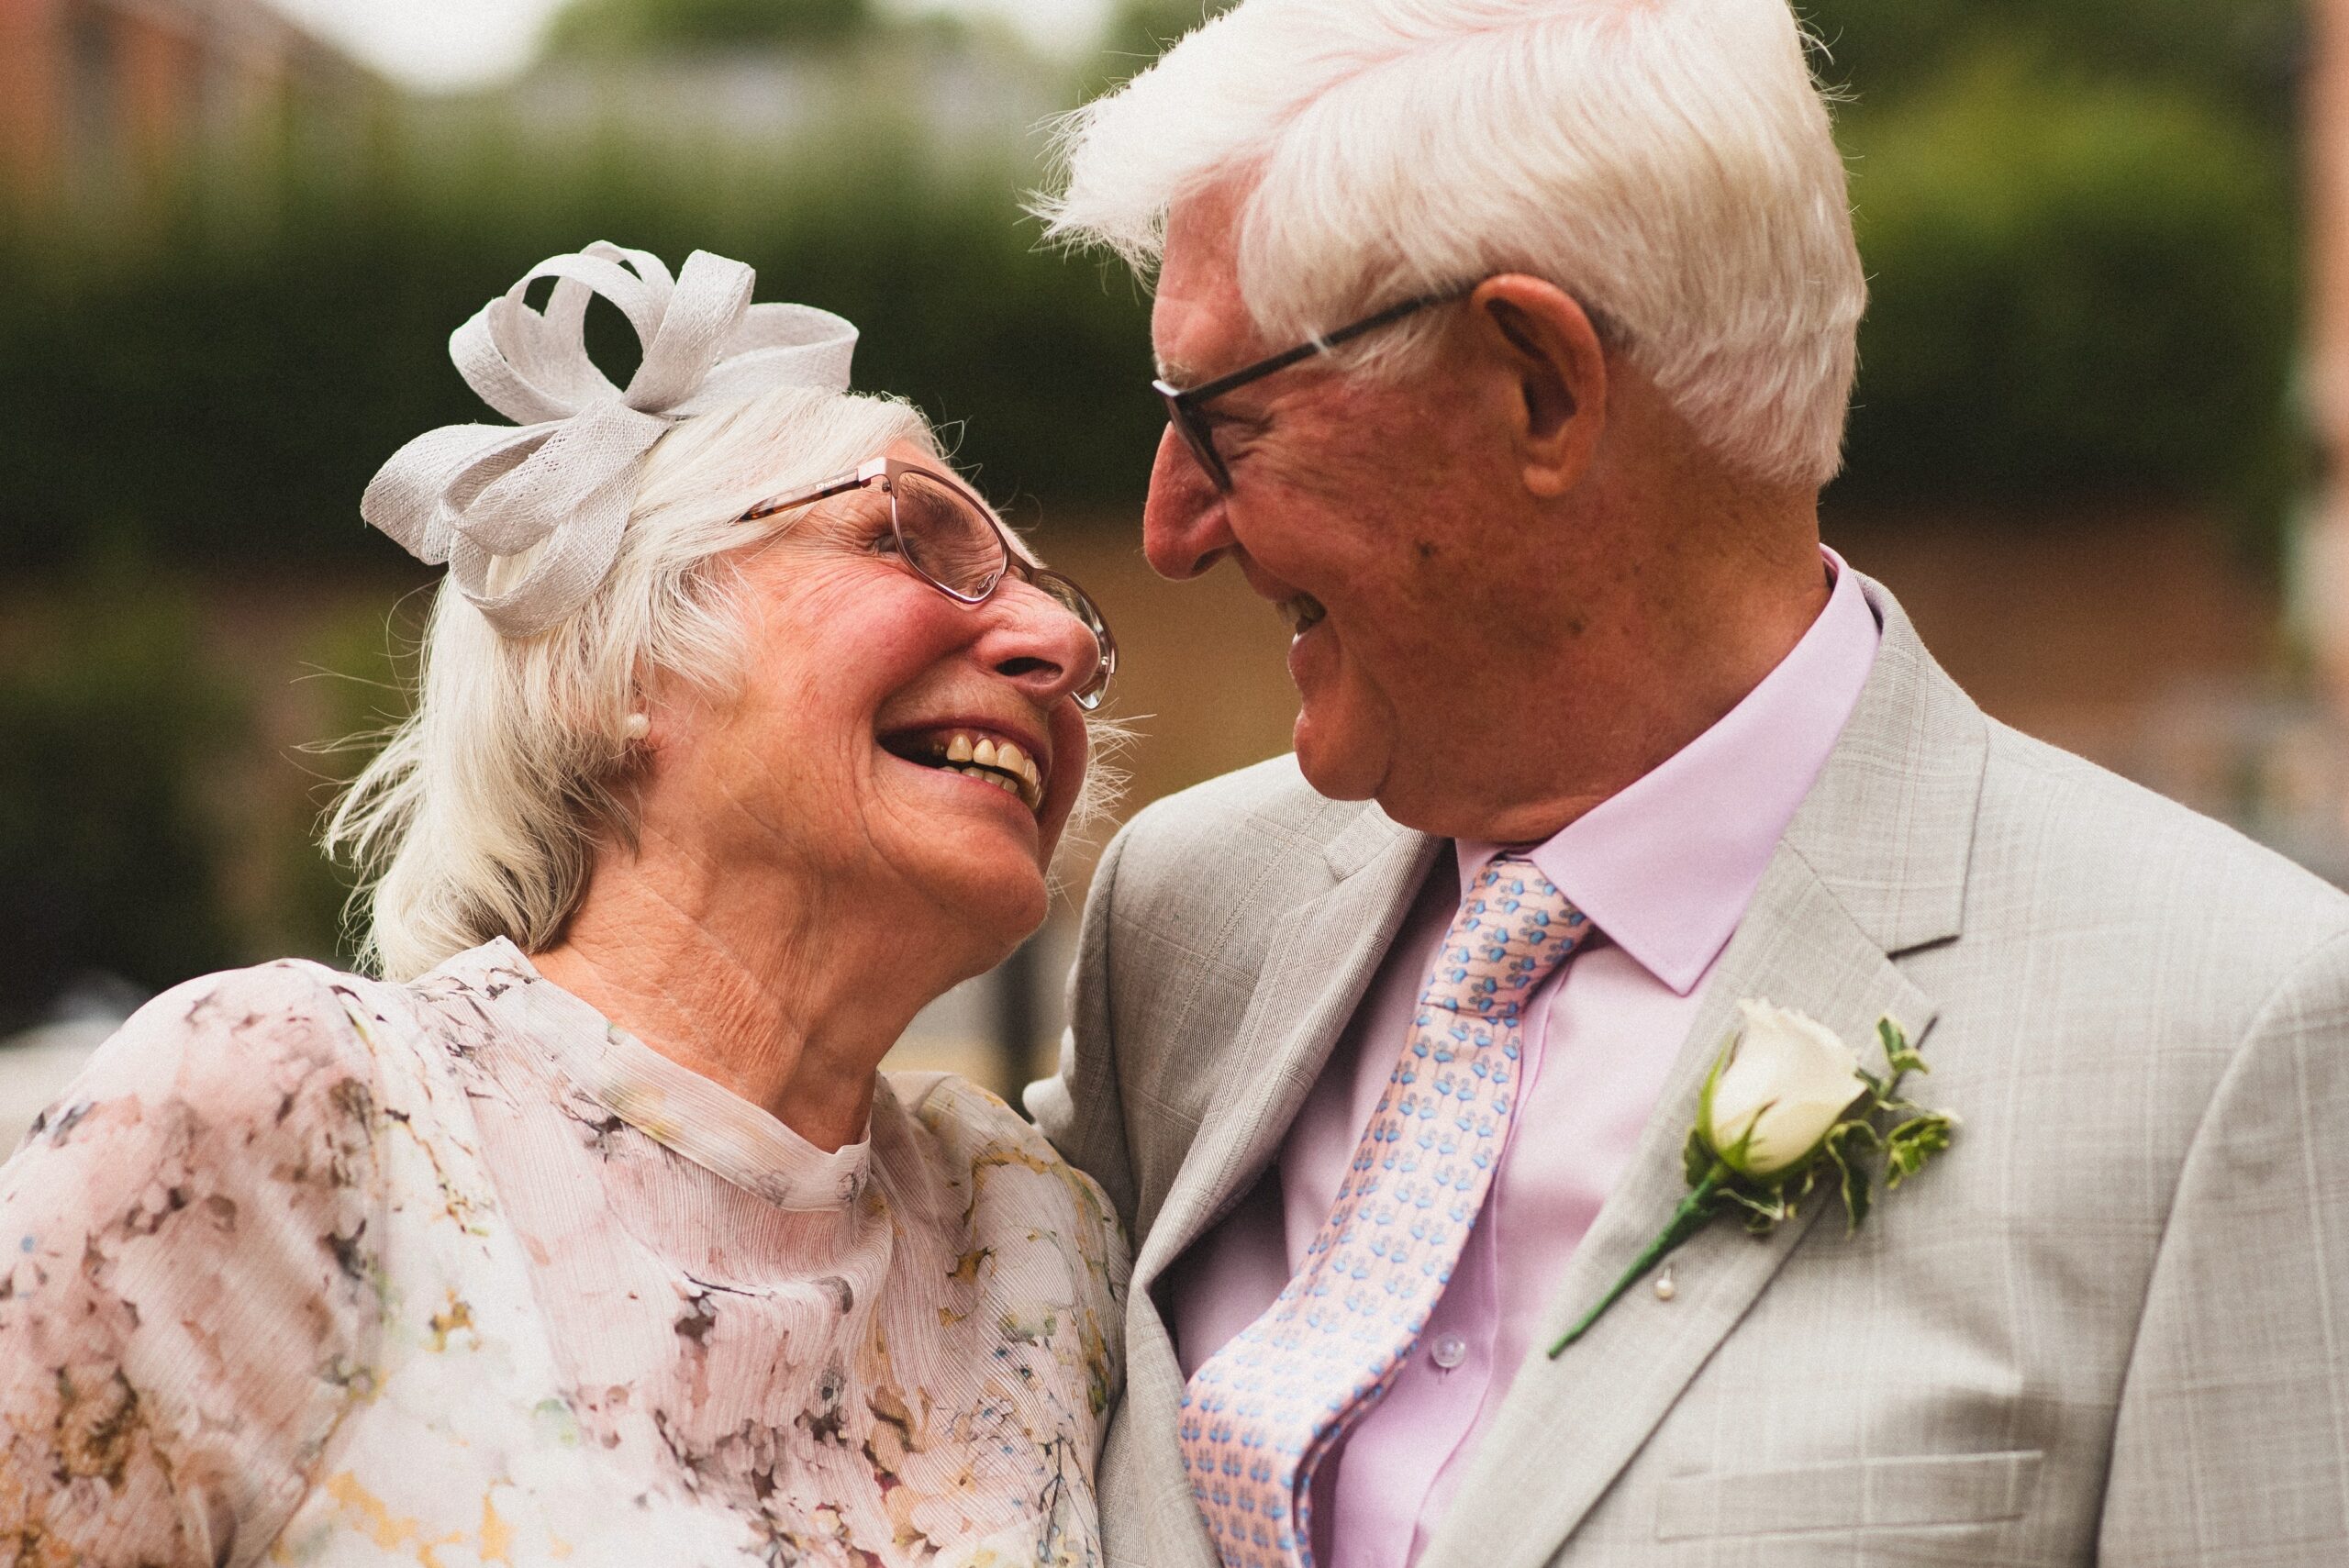 Older couple, looking at each other smiling, in formal wear.